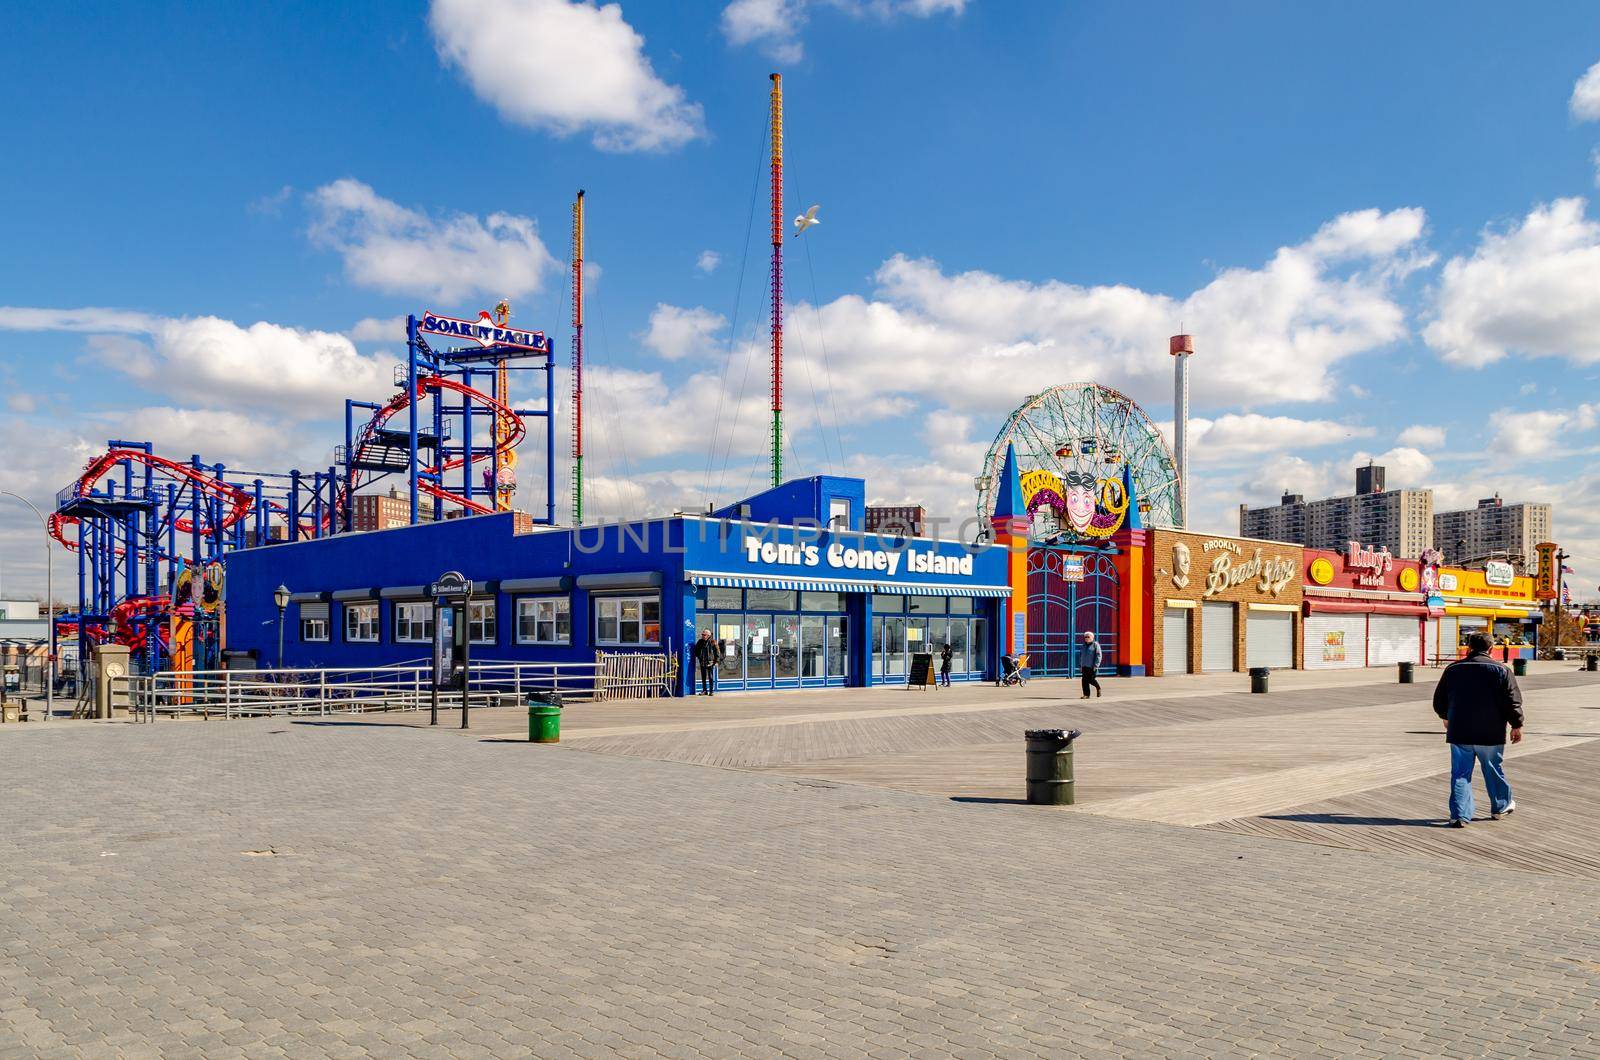 Tom's Coney island, Brooklyn Restaurant with Soarin' Eagle Rollercoaster, Wonder Wheel and Beach Promenade at Luna Park Amusement Park, Coney island, Brooklyn, New York City during winter day with clear sky, People walking at the Promenade, horizontal